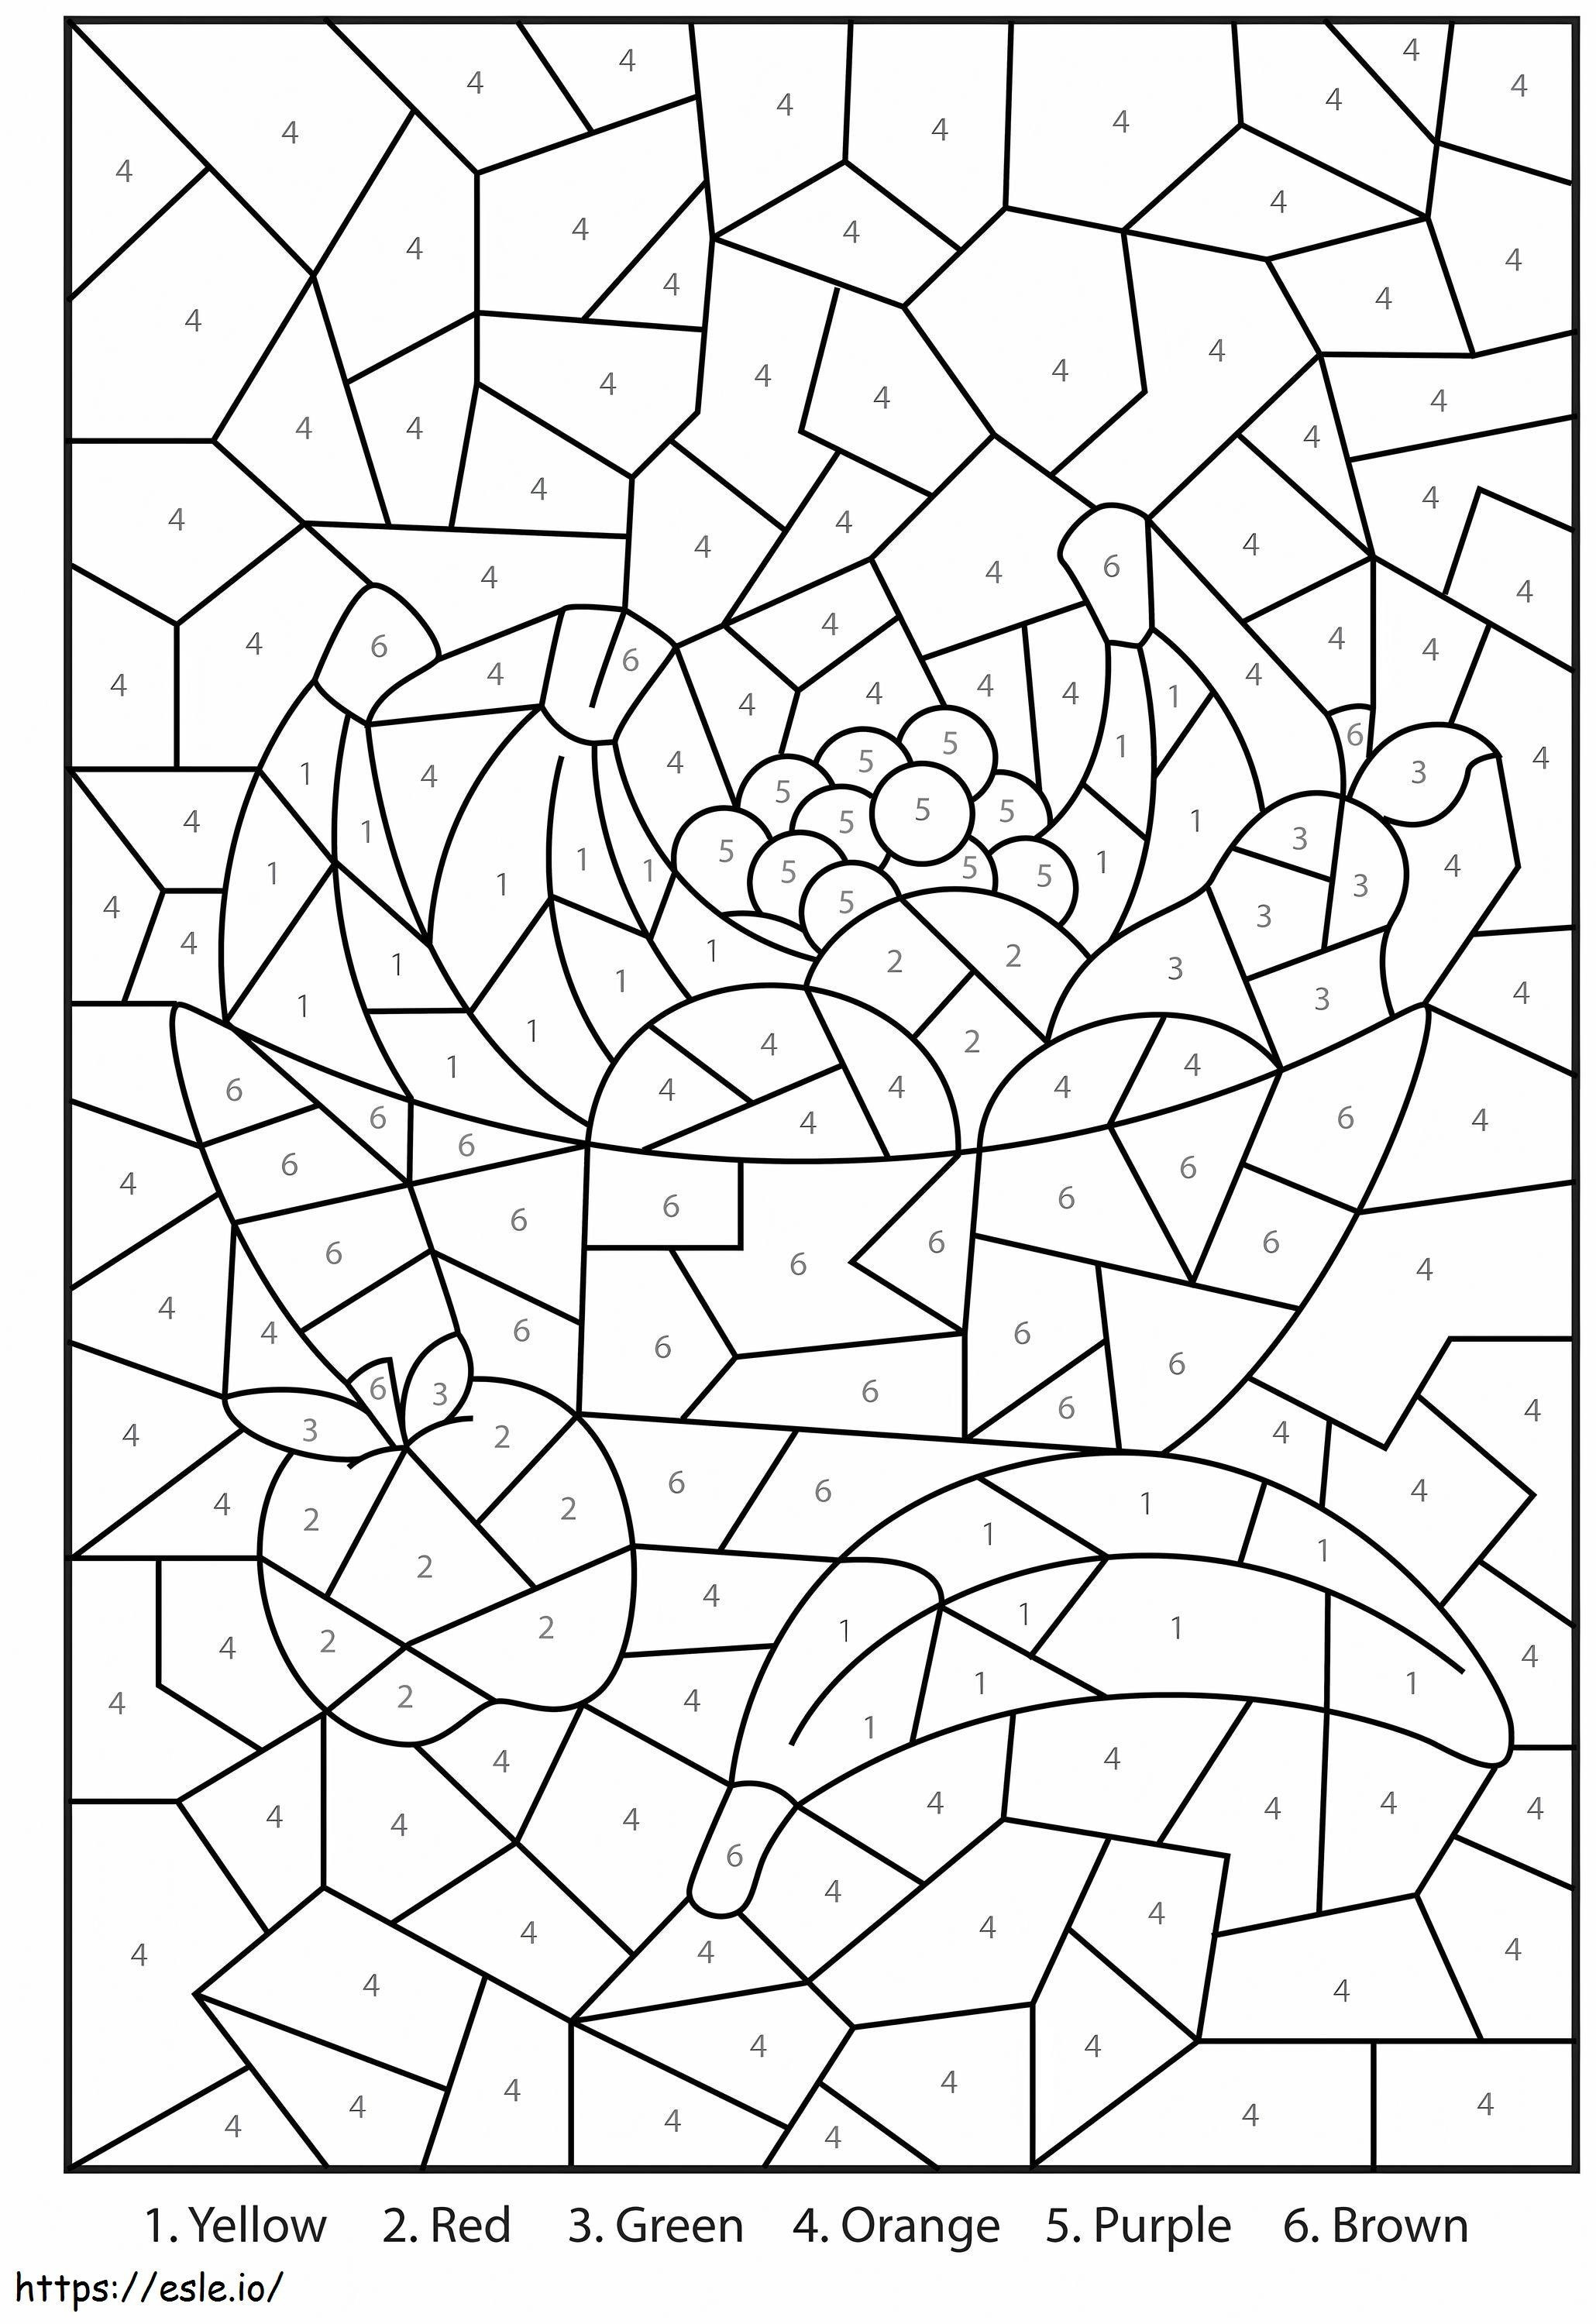 1573088100 C7B9819C8Ef14992A9Bedd1993064E3B Scaled 2 coloring page